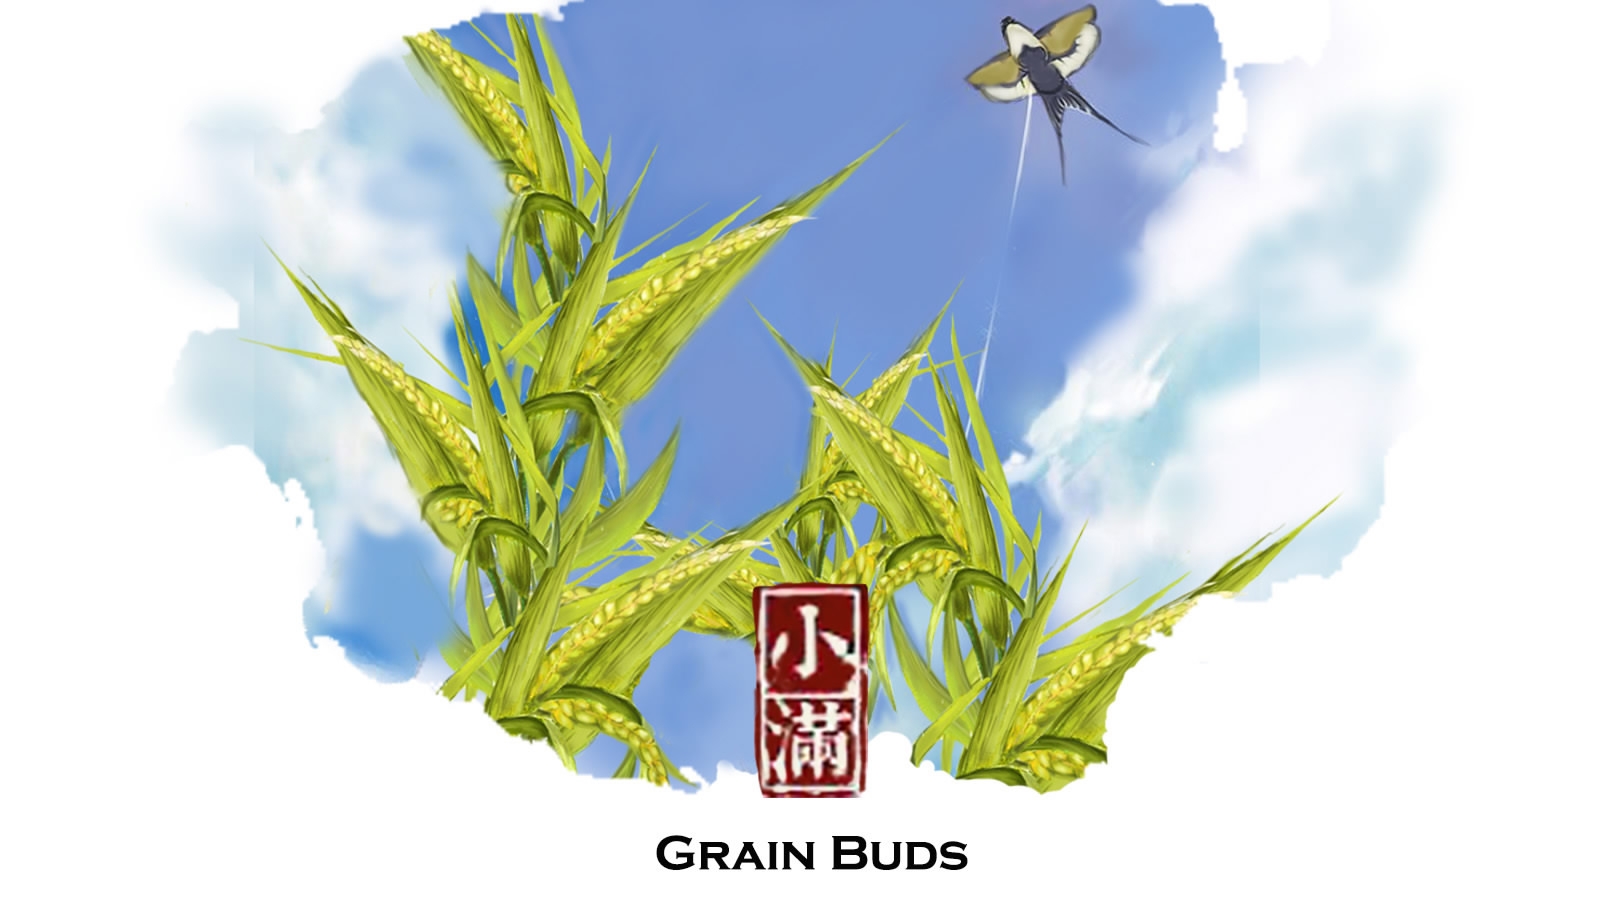 Grain Buds: When grains are about to ripen